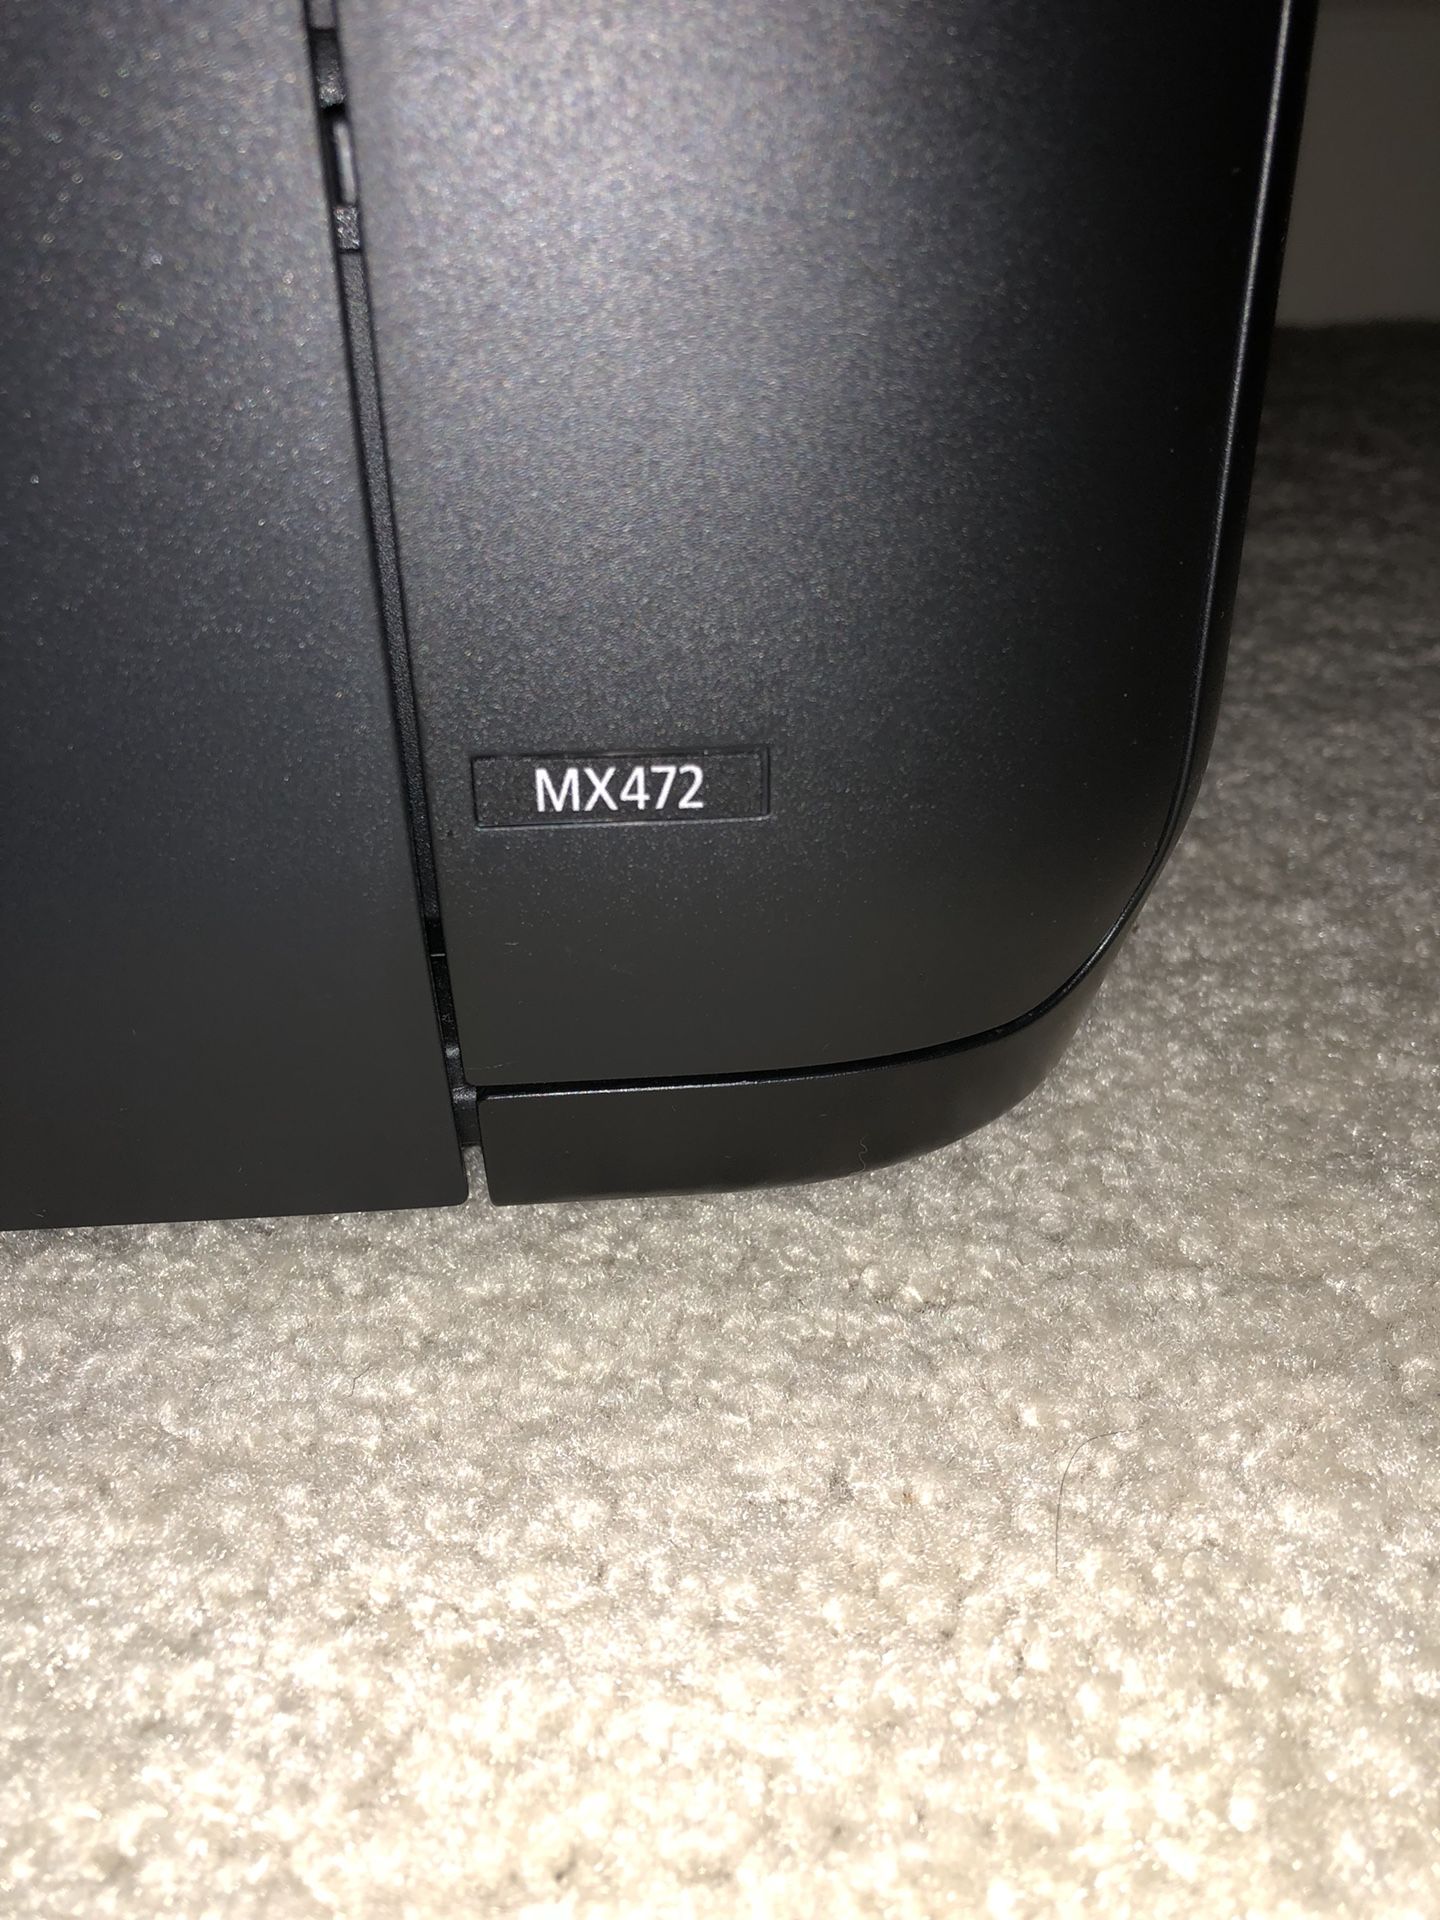 Cannon MX472 Wireless Inkjet All In One Printer/Scanner/Fax